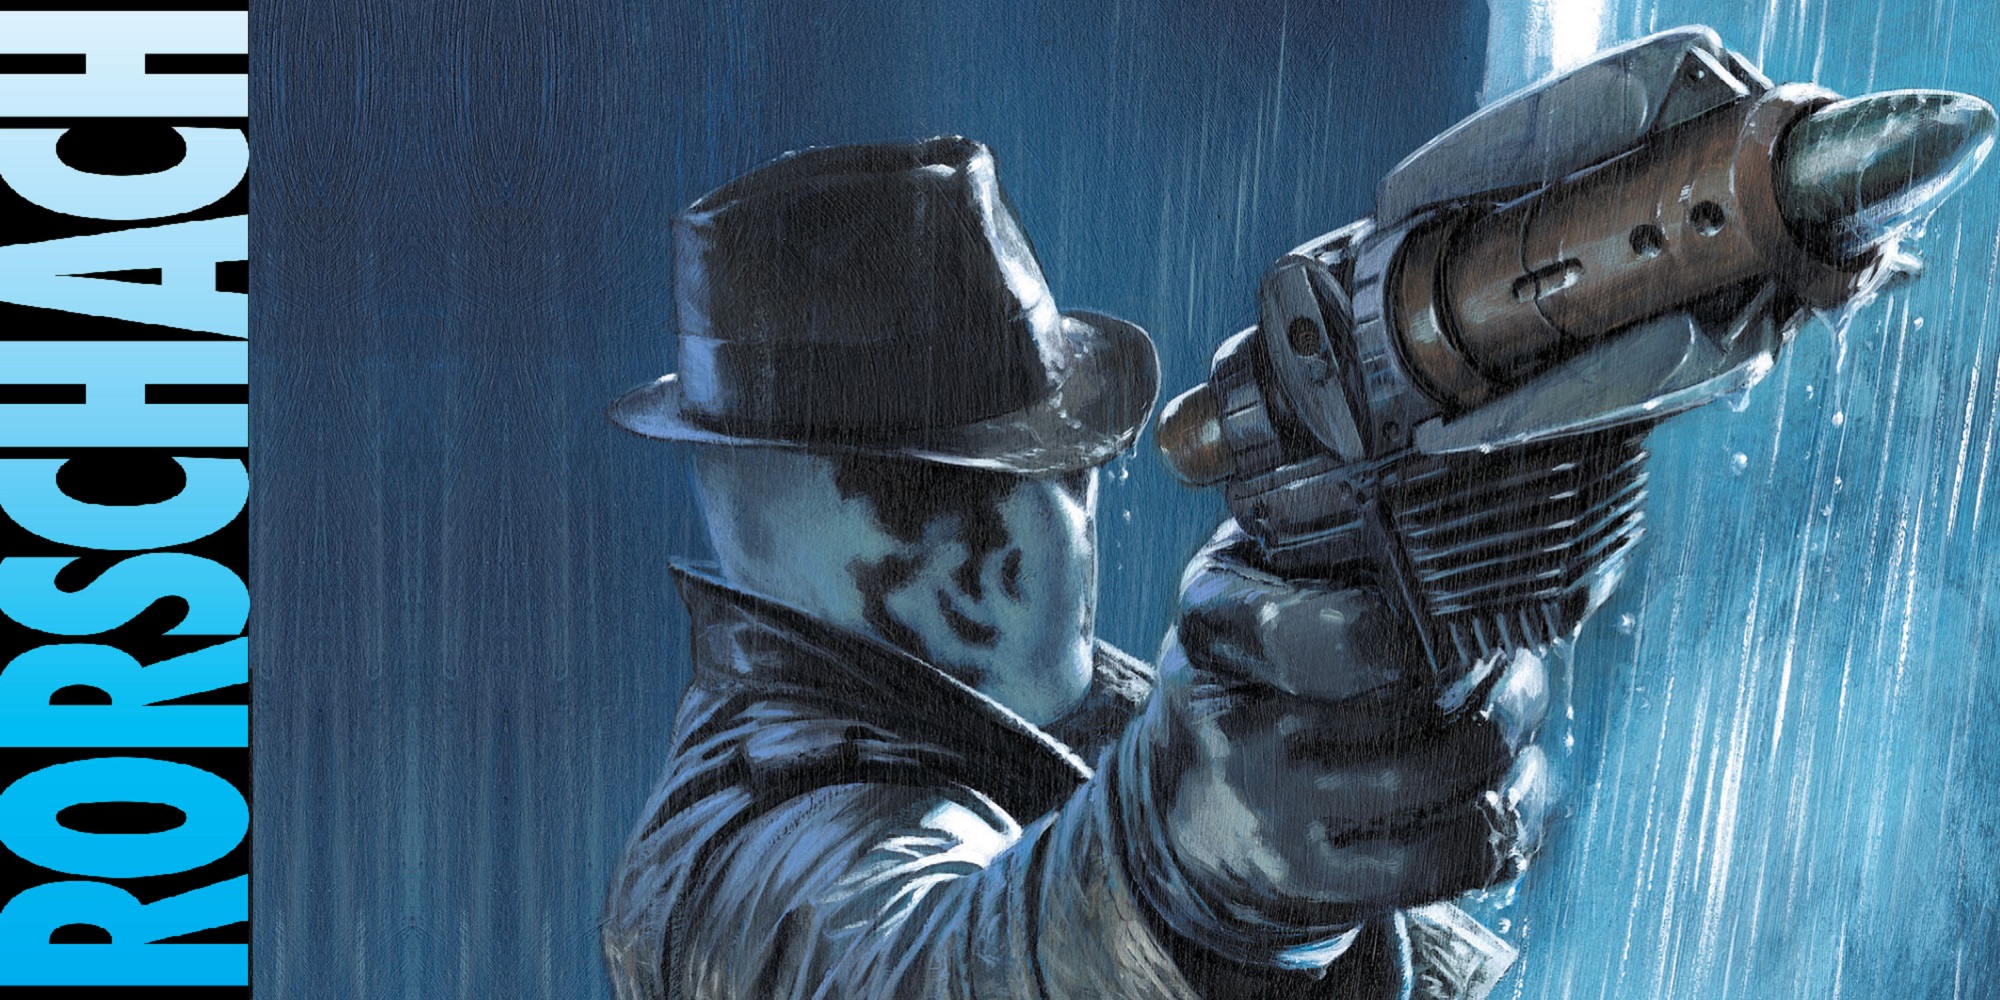 REVIEW: Rorschach #1 Is Dangerous And Irresponsible - WWAC